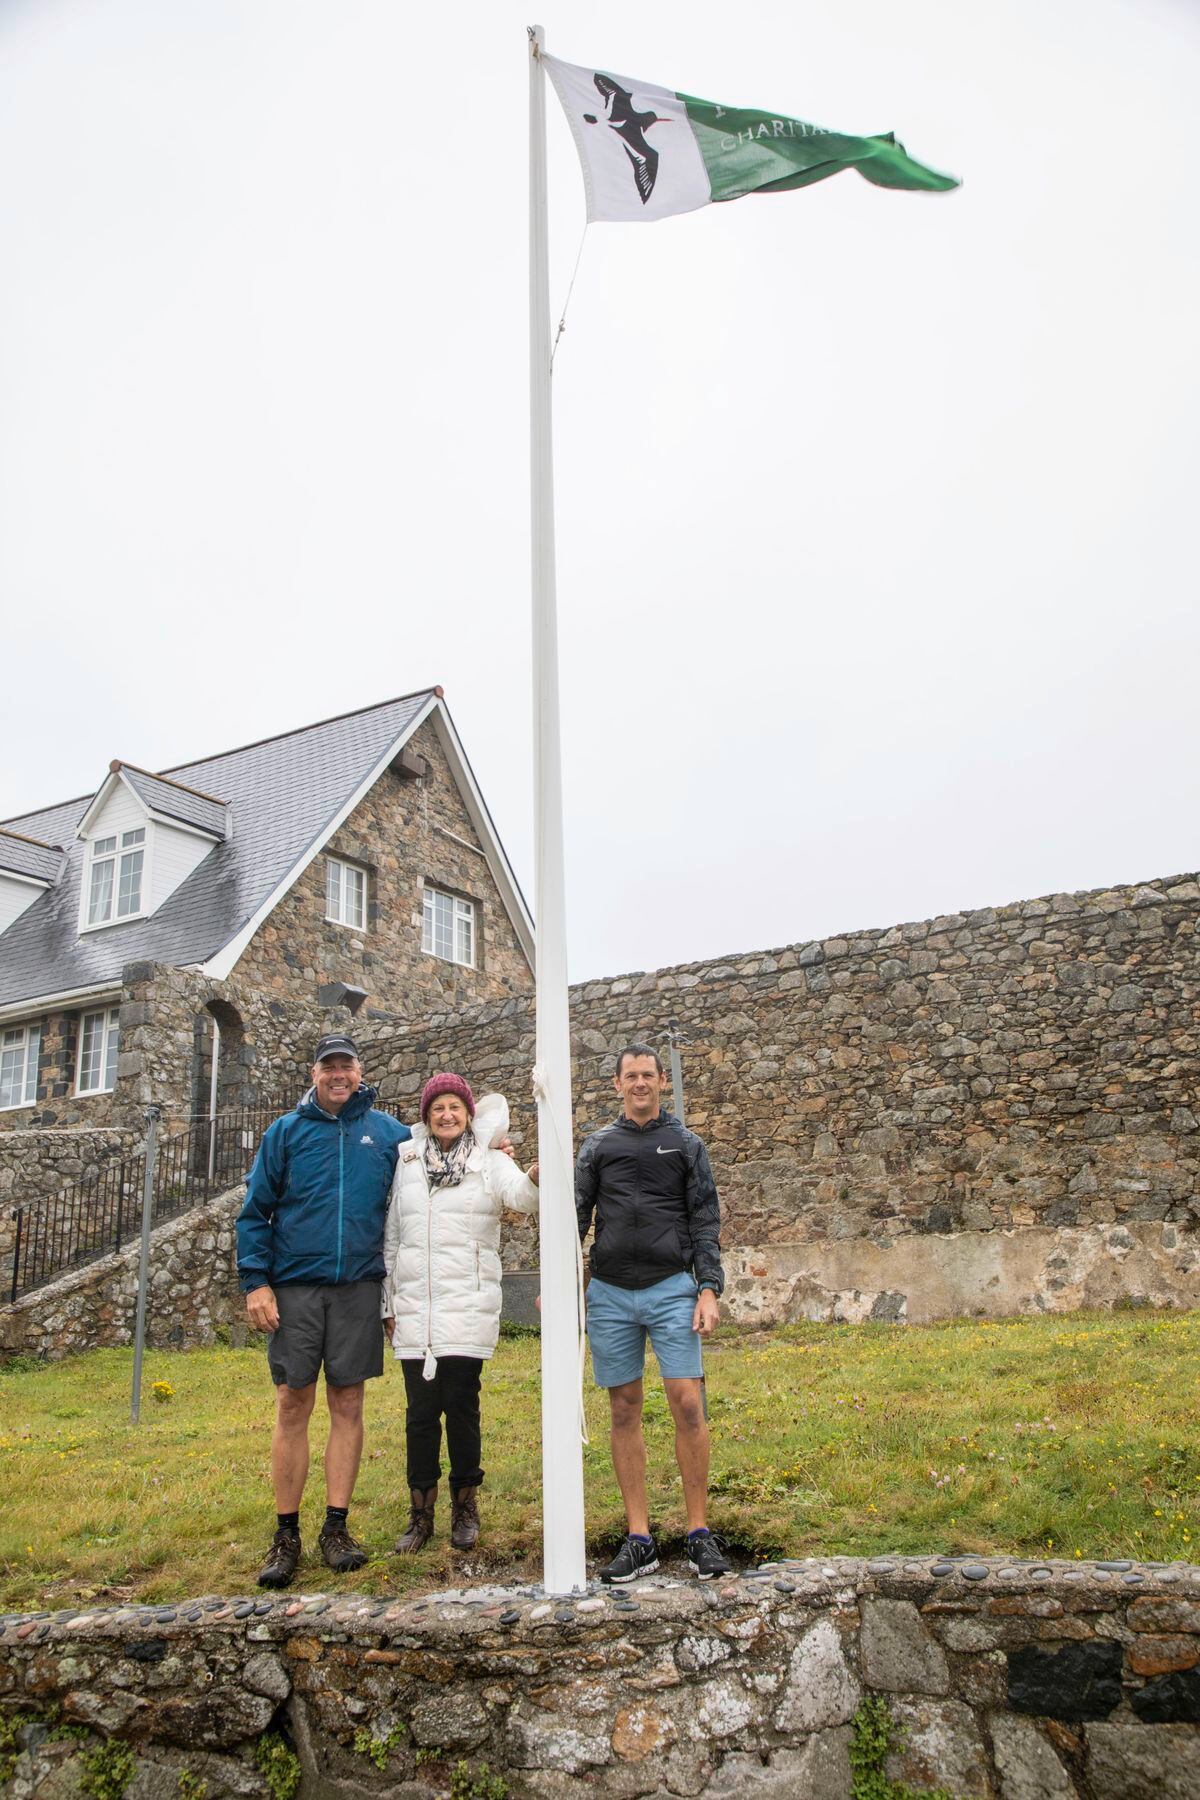 Lihou now has its own flag pole and flag, kindly donated to the island by Jean Rouget in honour of her late husband Mike. Left to right is former warden Richard Curtis, Jean Rouget and new Lihou warden Steve Sarre (Picture by Sophie Rabey, 25519959).